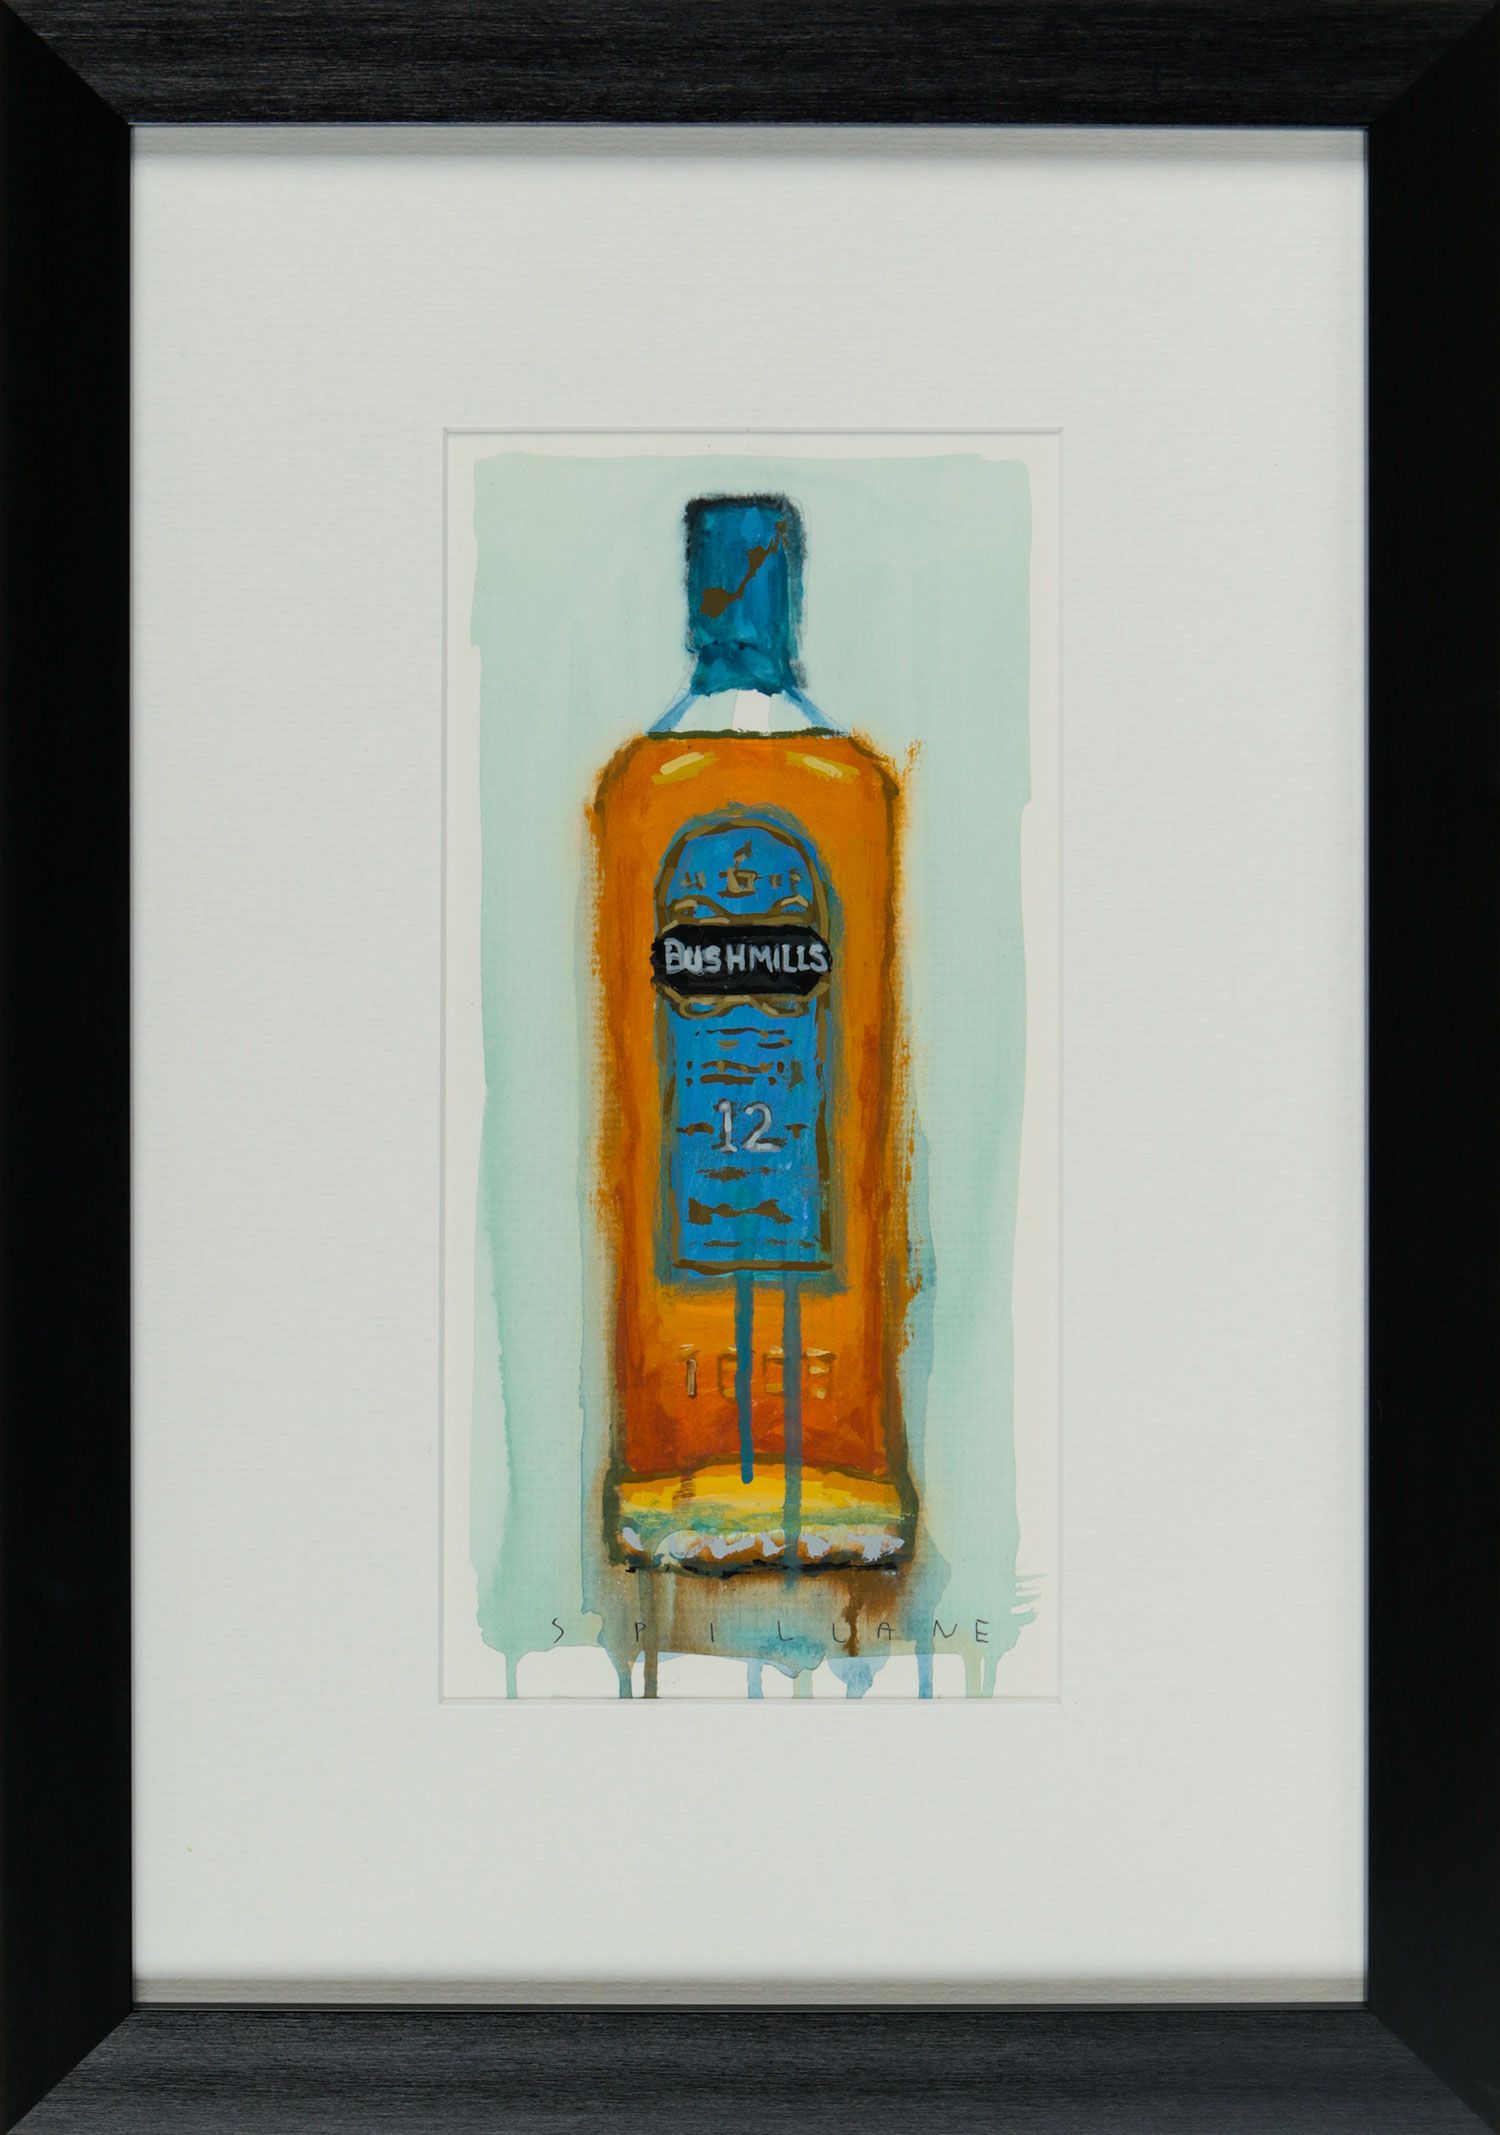 BUSHMILLS - (12 YEAR OLD BOTTLE) by Spillane at Ross's Online Art Auctions